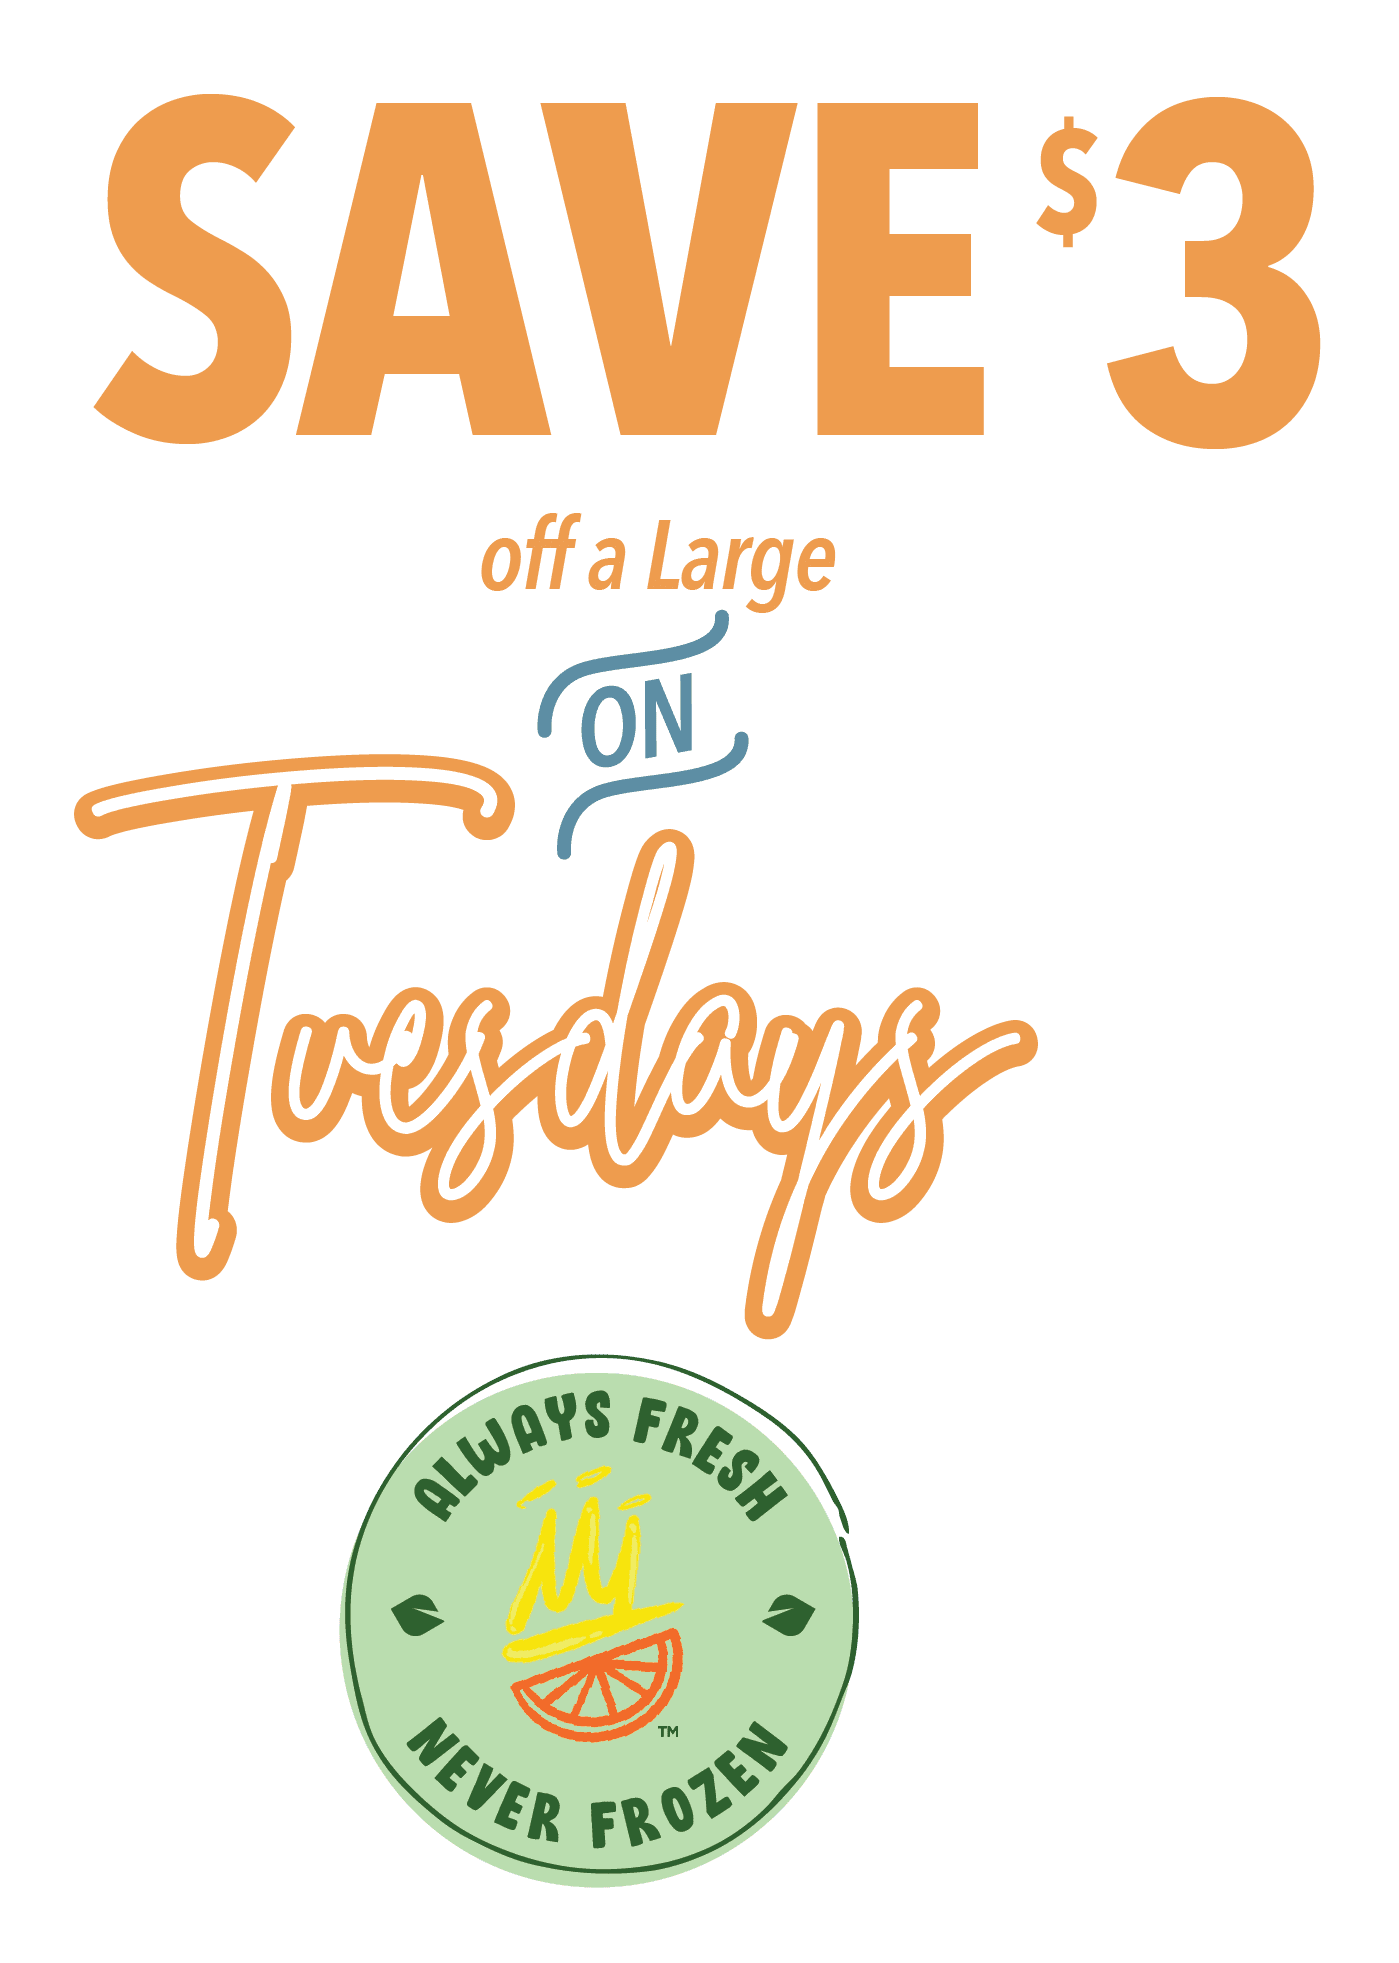 save $3 on a large pineapple mylk every tuesday